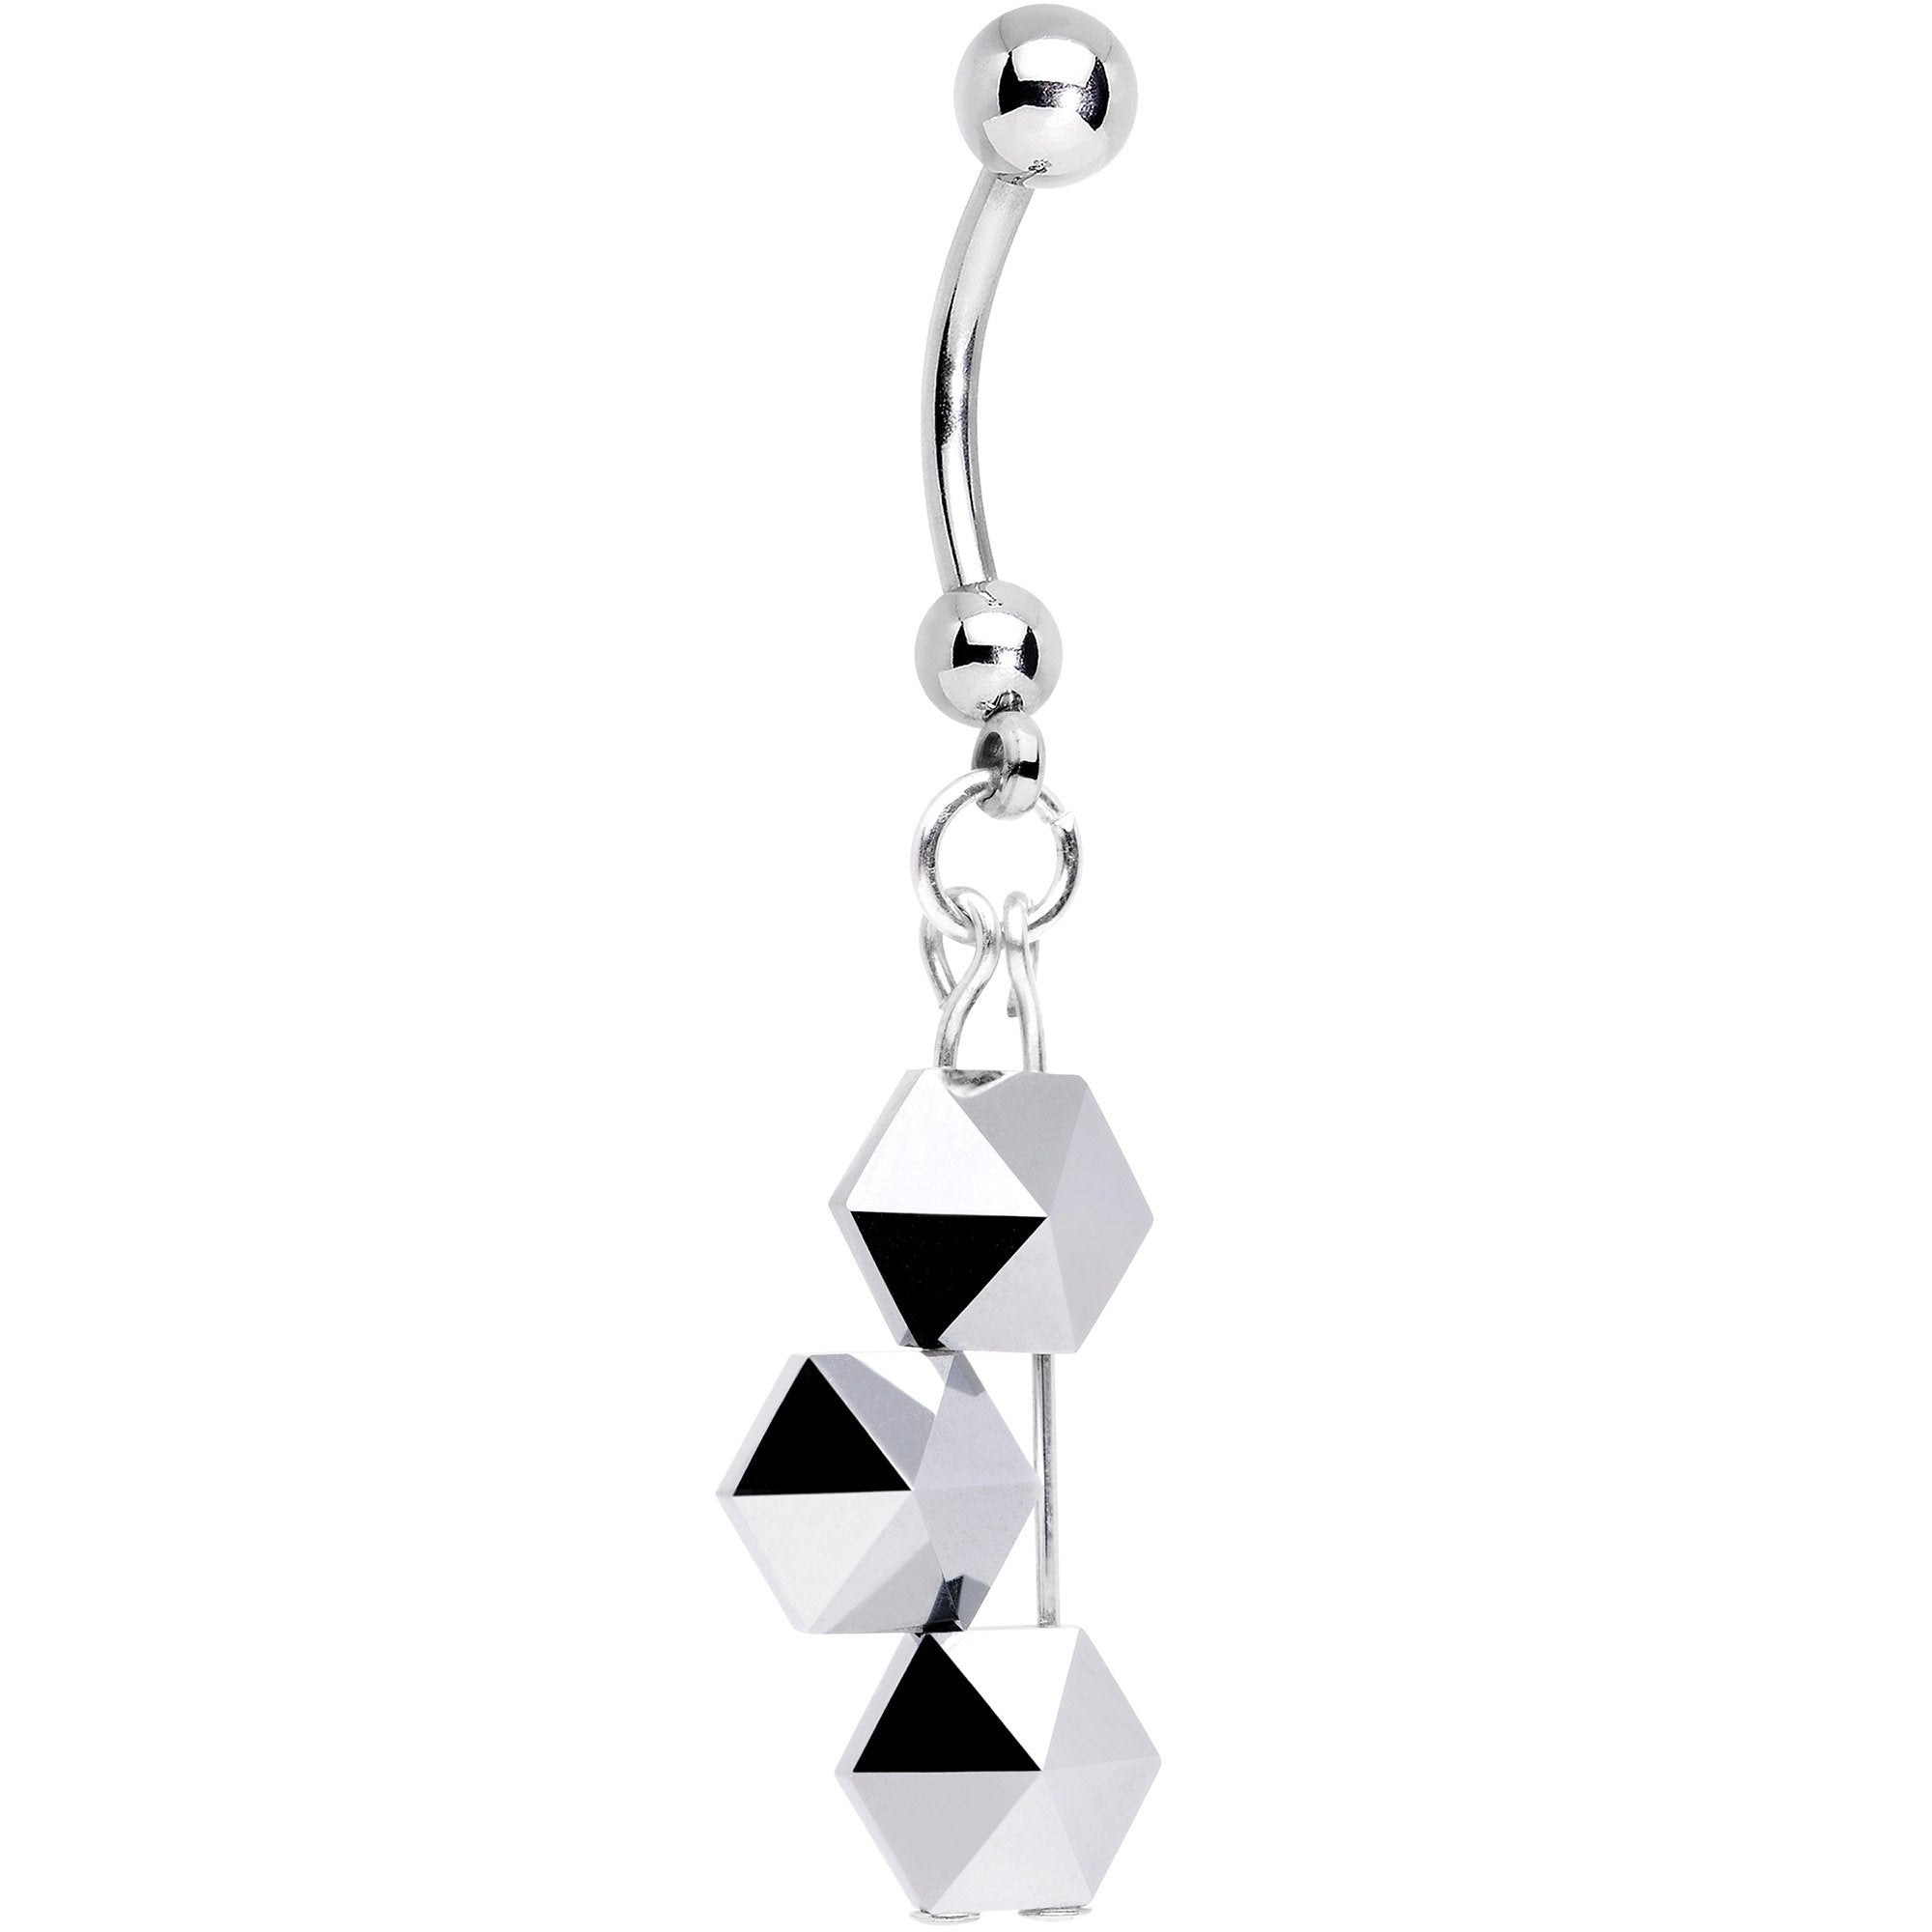 Handmade Geometric Belly Ring Created with Crystals